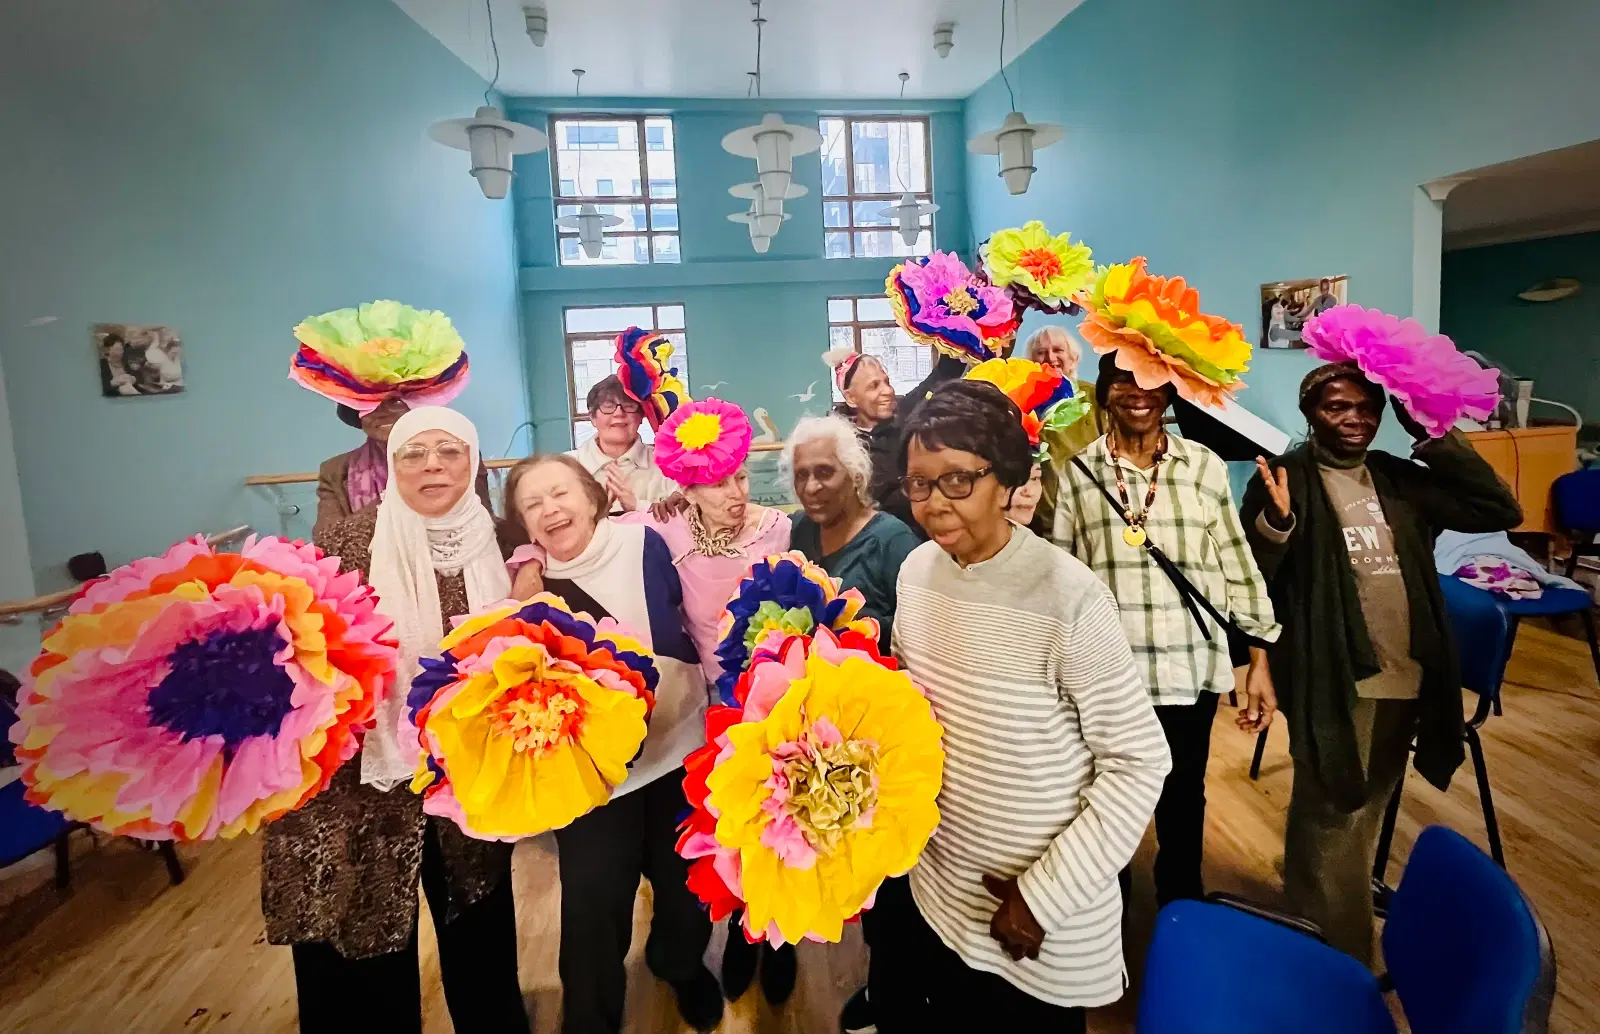 A diverse group of individuals joyfully holding vibrant paper flowers.